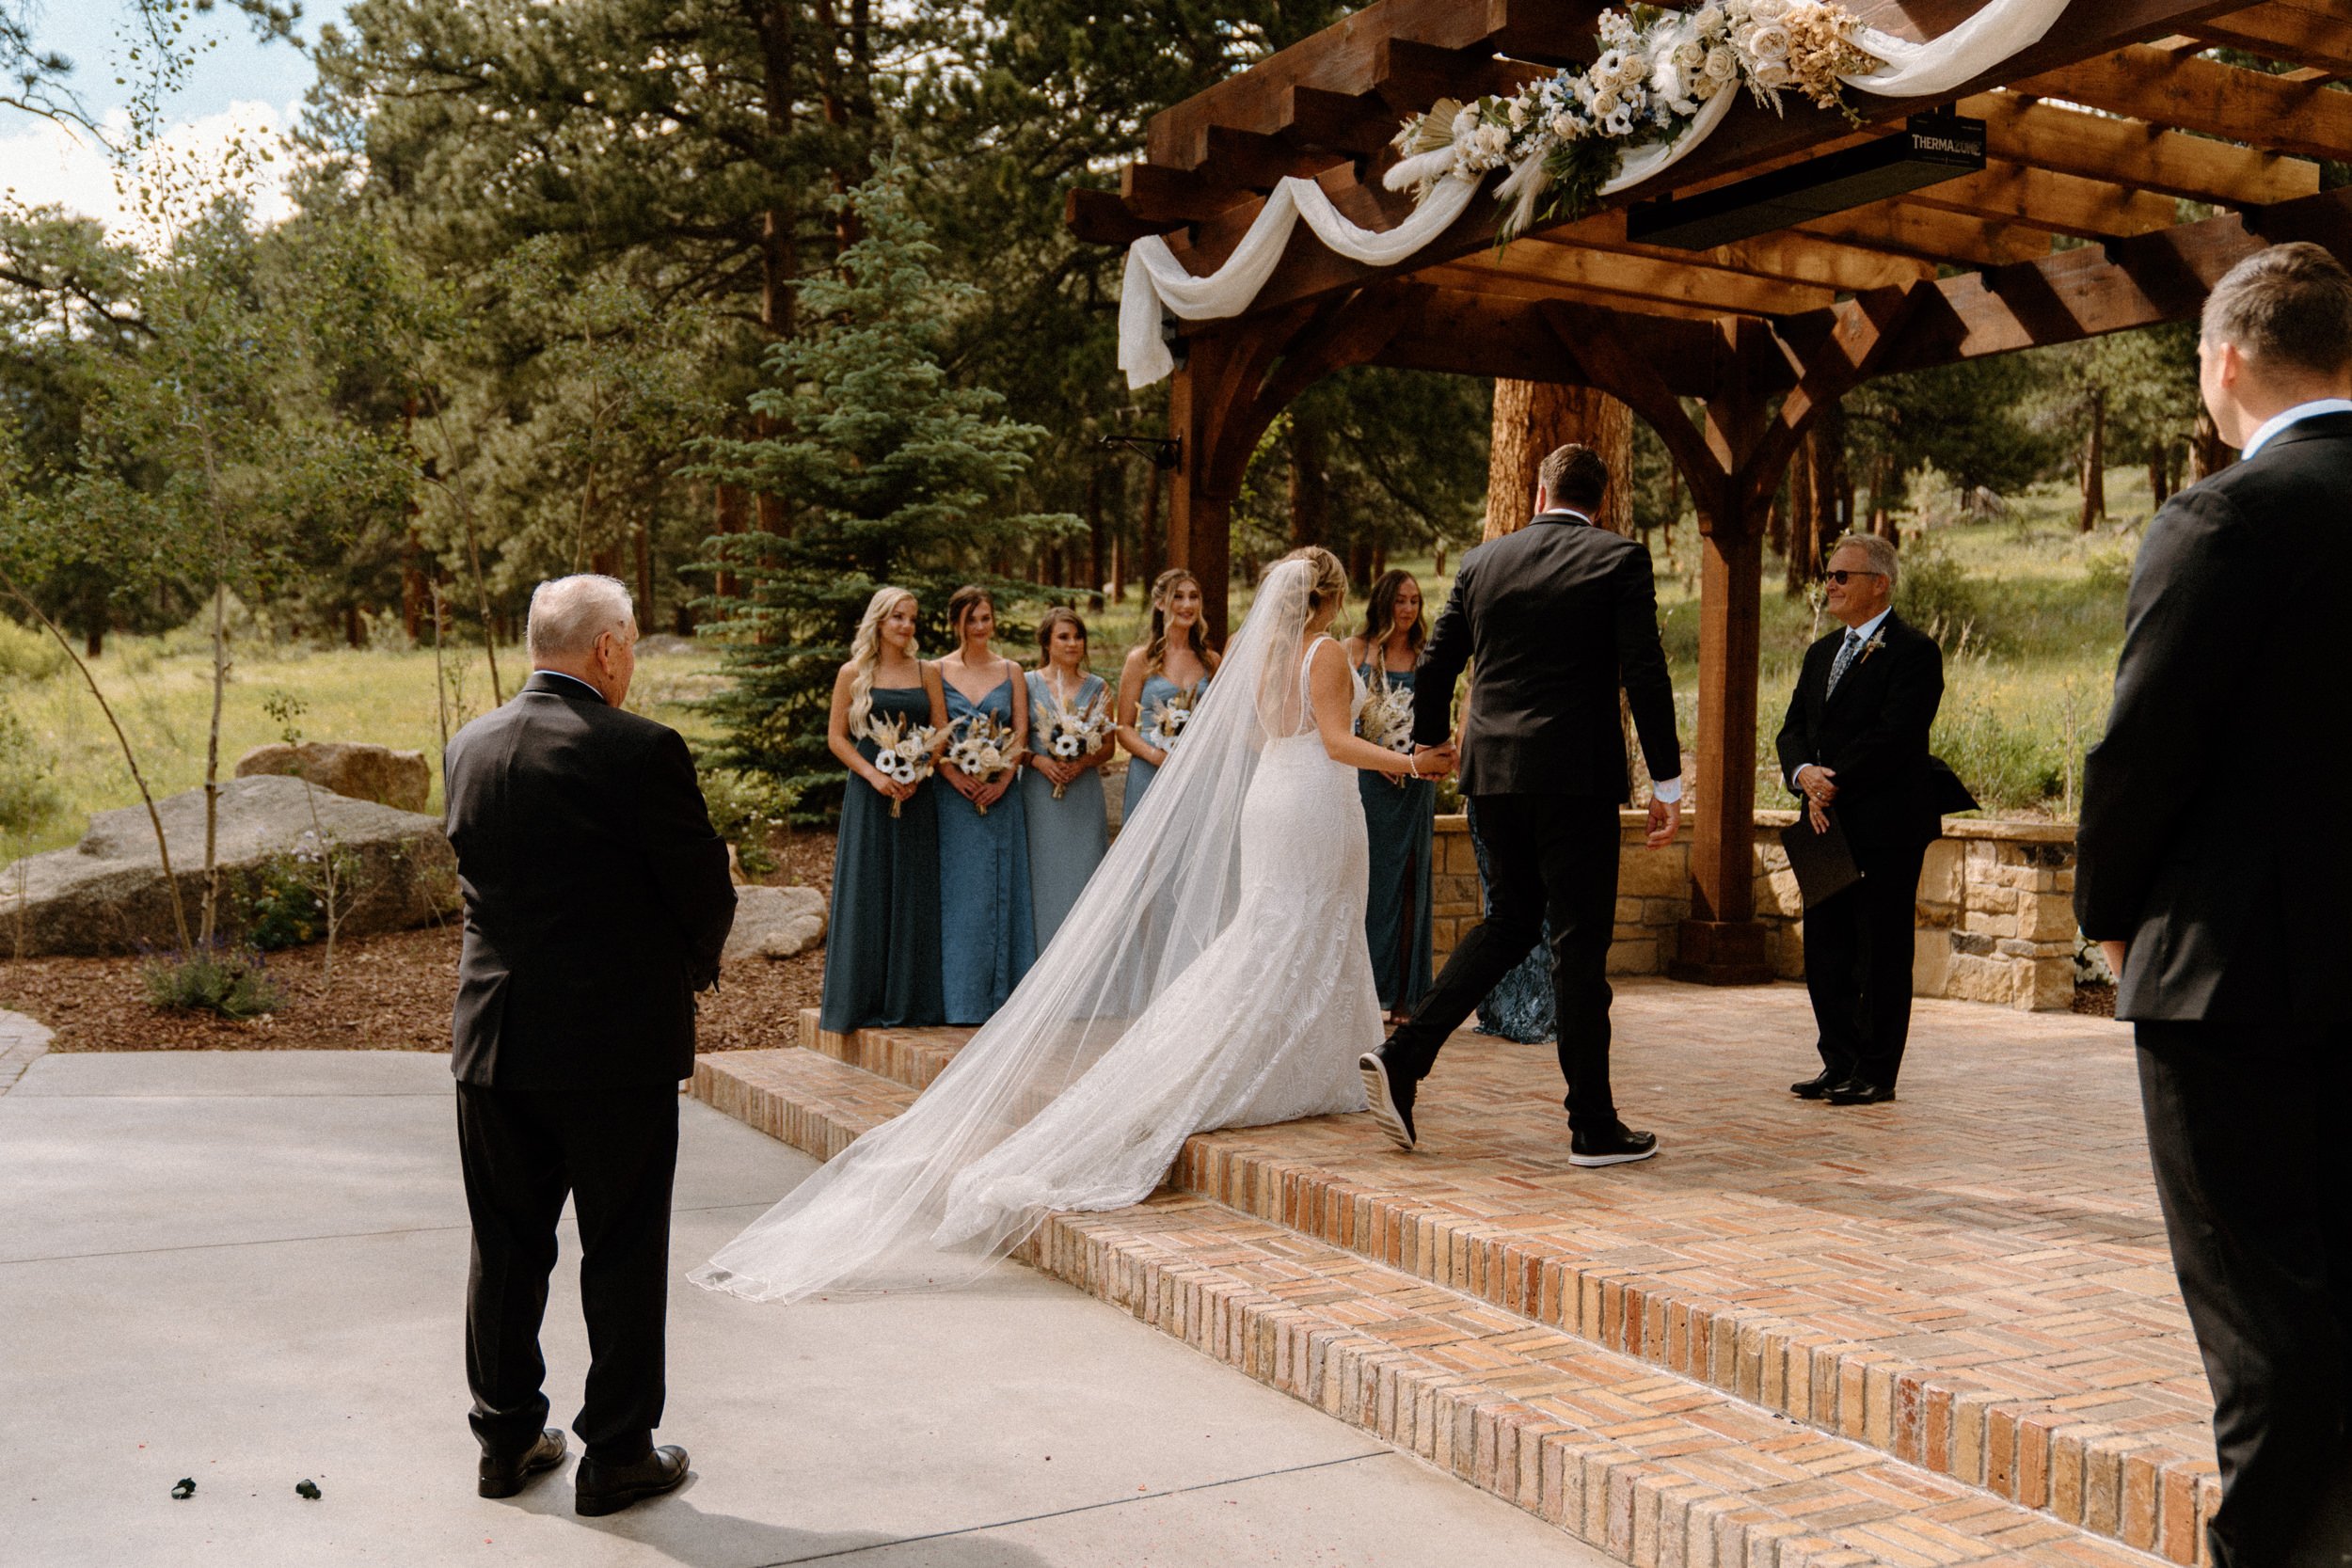 The bride and groom walk up to the altar together at Della Terra Mountain Chateau in Estes Park, CO